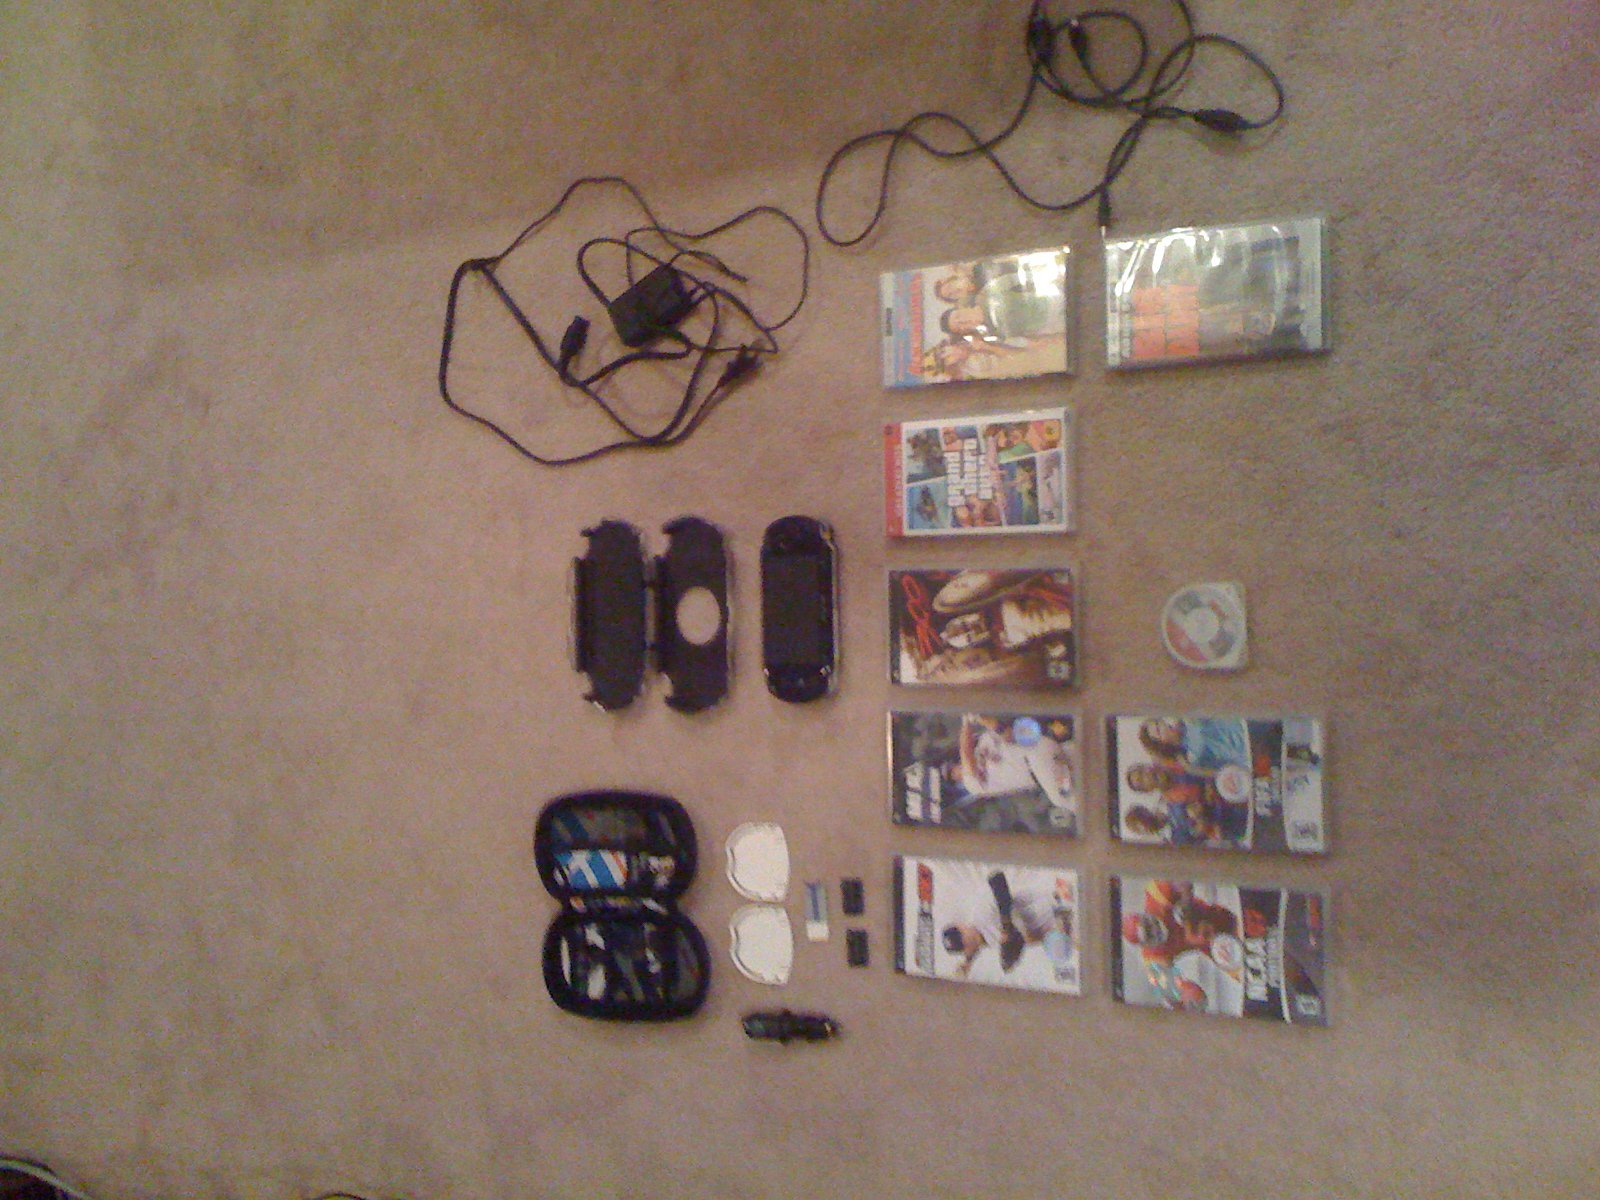 PSP 1001 with Extra's